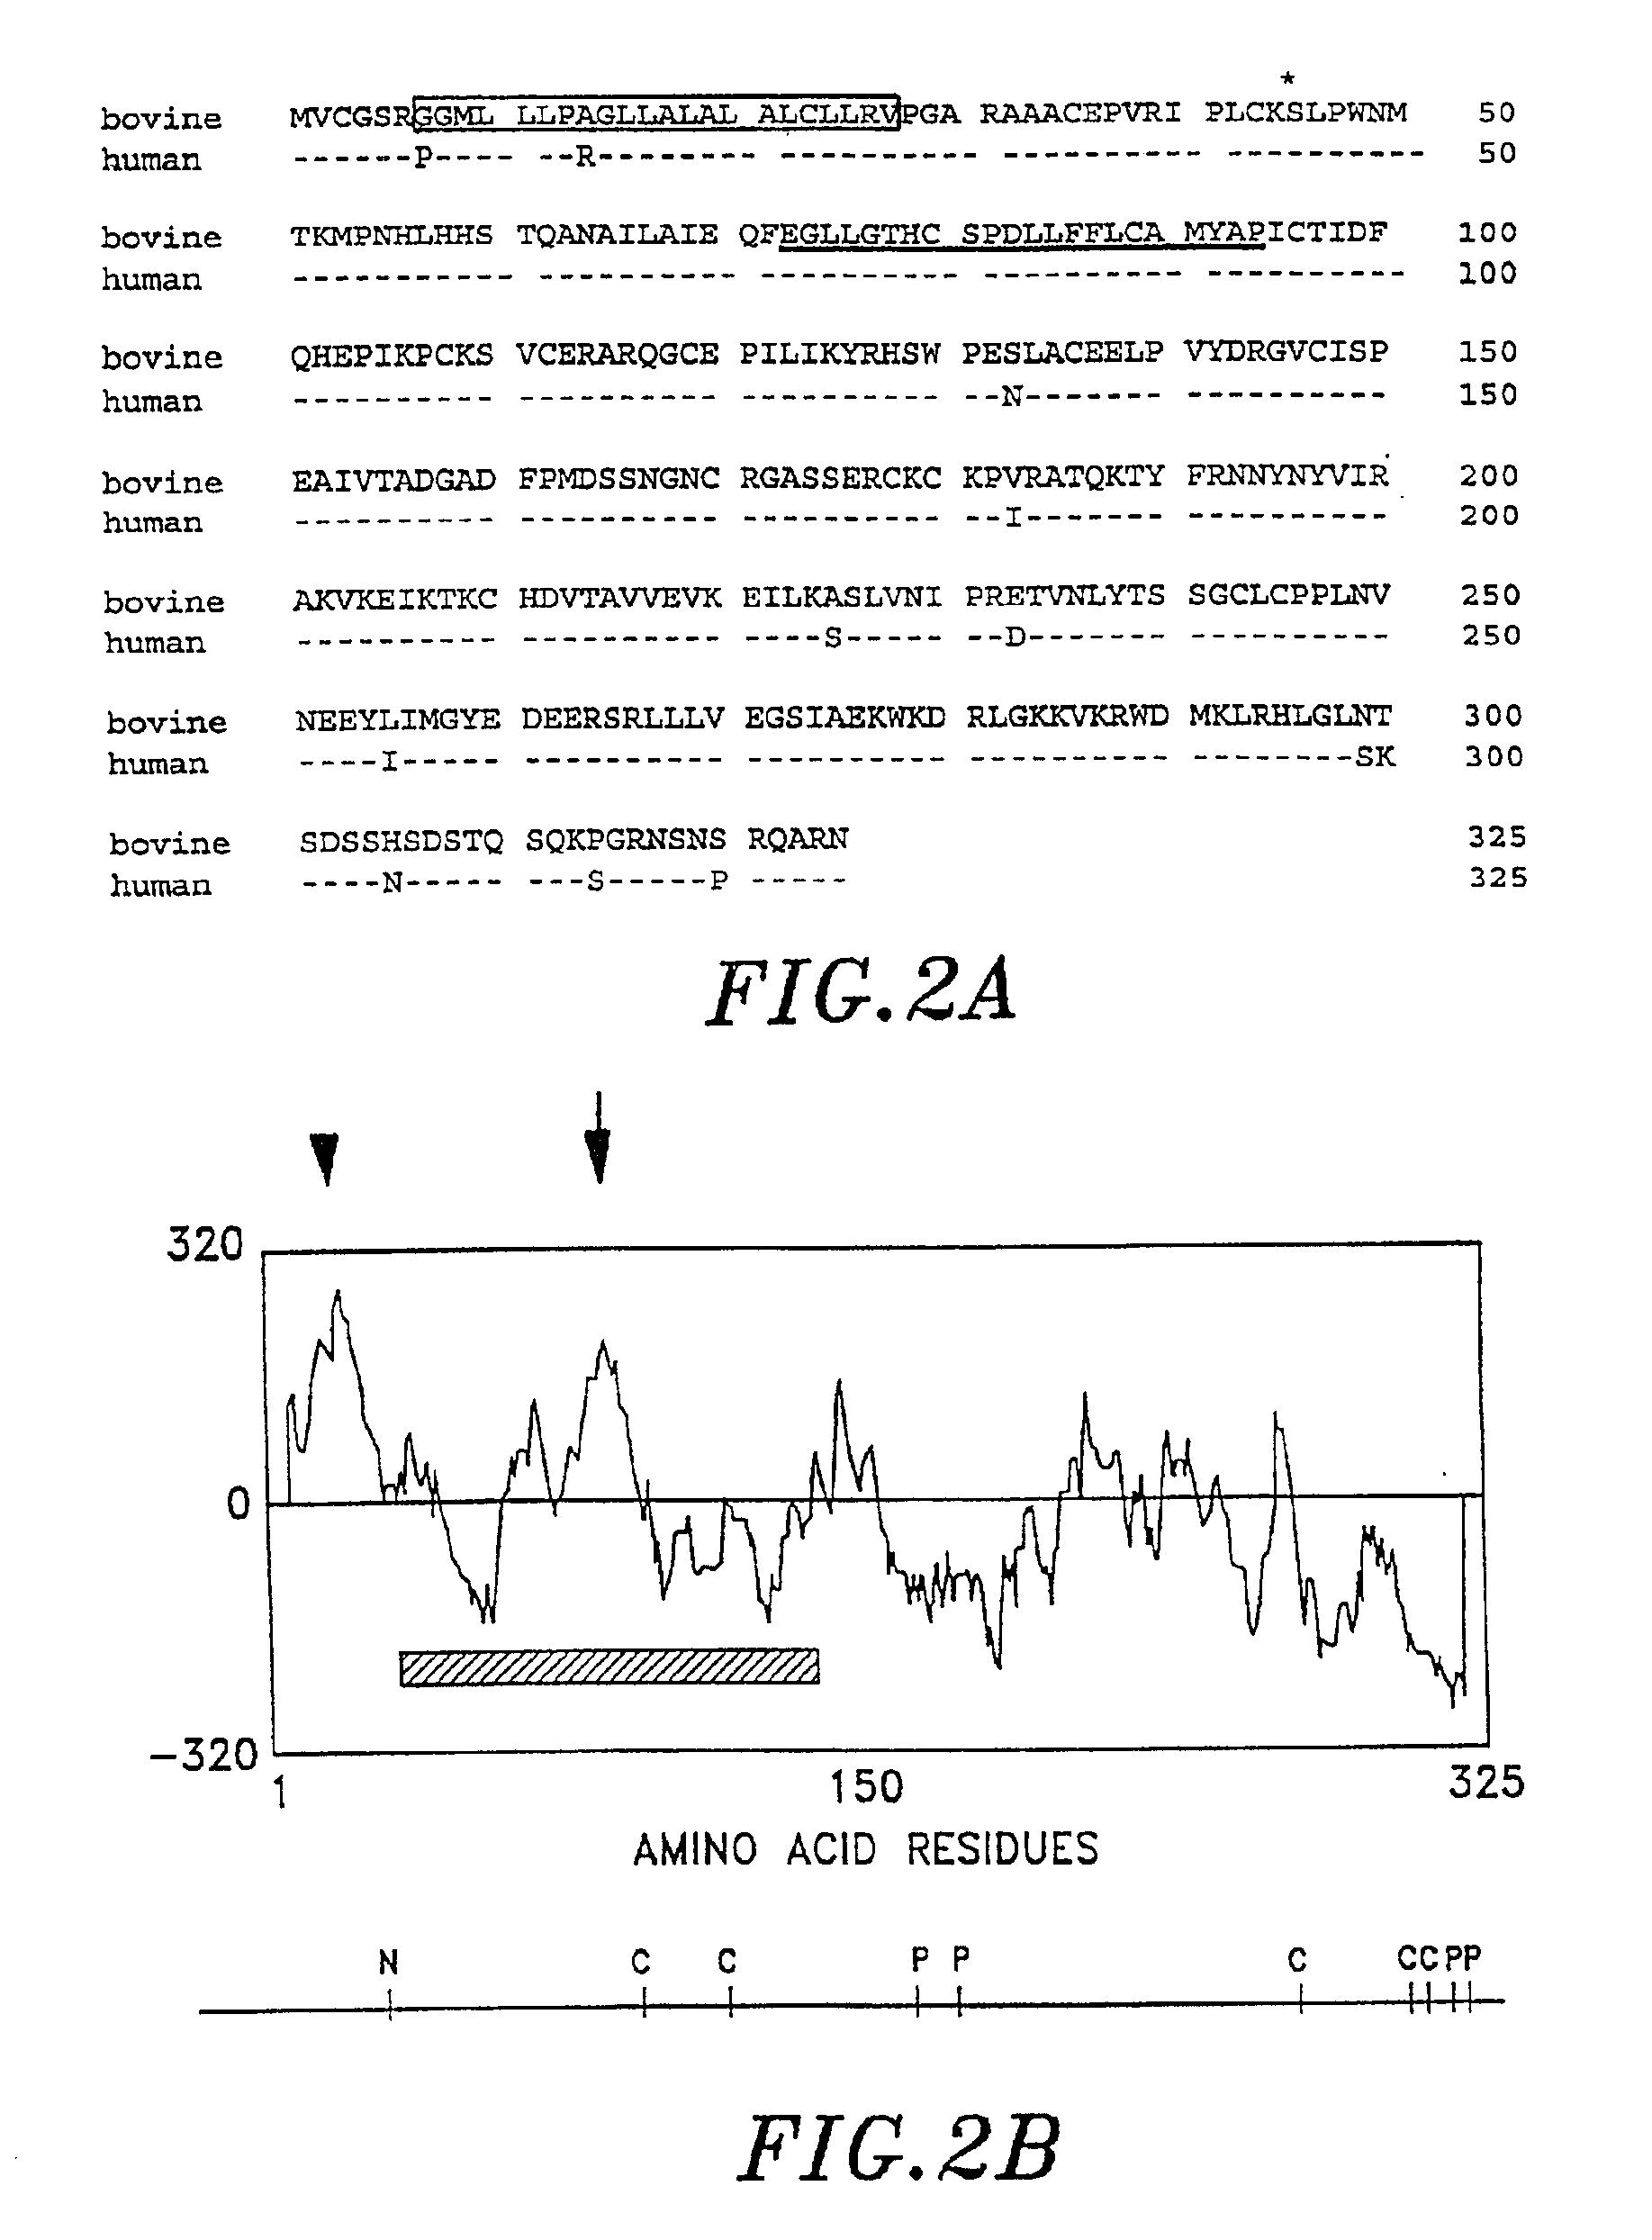 Method of modulating tissue growth using Frzb Protein